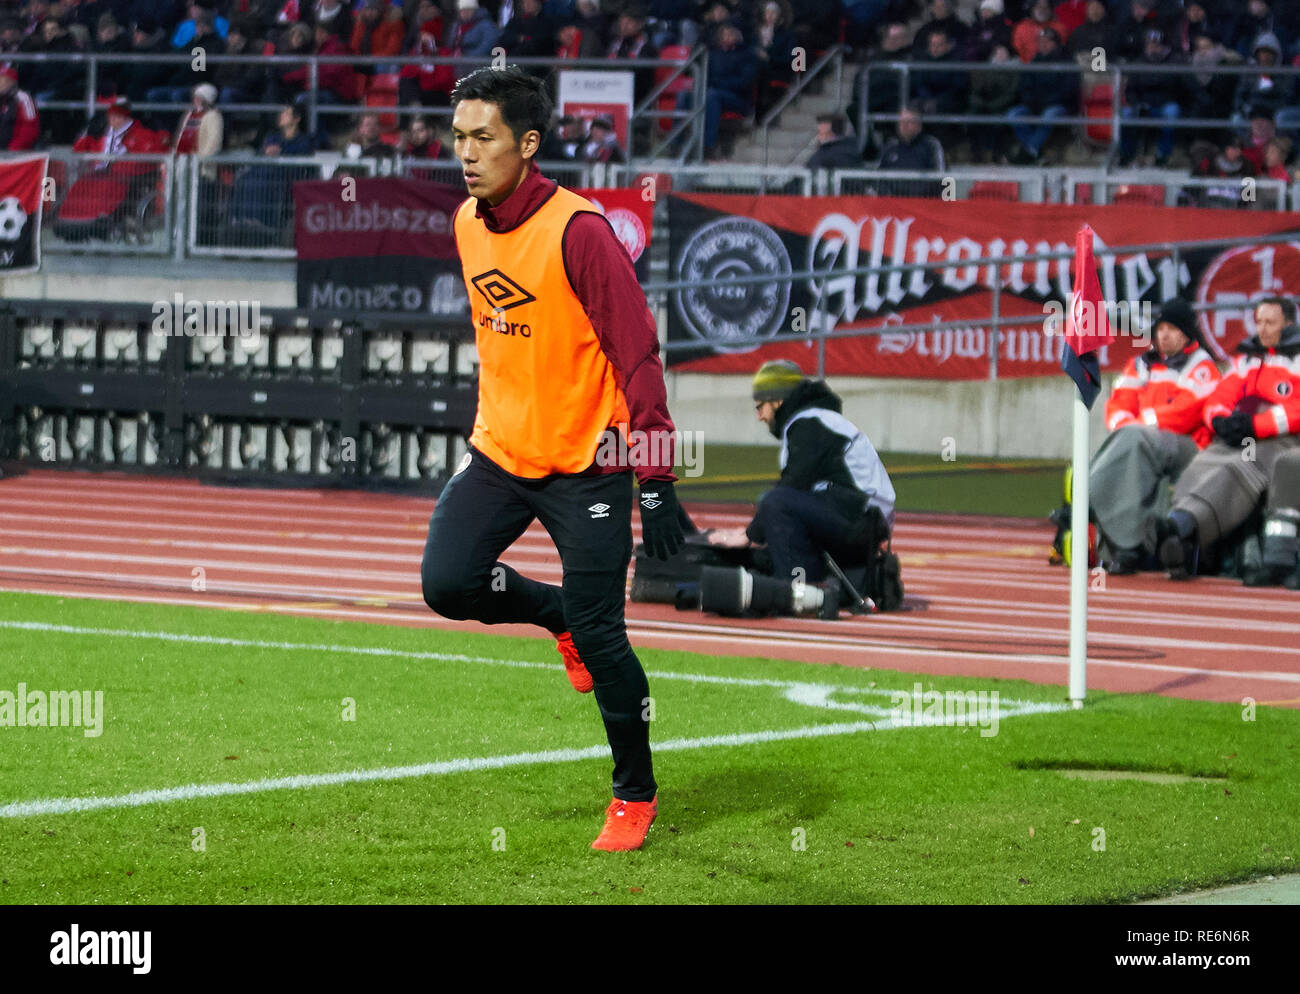 Nuremberg, Germany. 20th Jan, 2019. Yuya KUBO, FCN 14 Spare Bank, Player Bank, Reserve, Coach Bank, japanese player, Japan, Gymnastics, stretching, warming up, warm-up, preparation for the game,  1.FC NUEREMBERG - HERTHA BSC BERLIN 1-3  - DFL REGULATIONS PROHIBIT ANY USE OF PHOTOGRAPHS as IMAGE SEQUENCES and/or QUASI-VIDEO -  1.German Soccer League in Nuremberg, Germany, January 20, 2019  Season 2018/2019, matchday 18, Nürnberg,  Credit: Peter Schatz/Alamy Live News Stock Photo